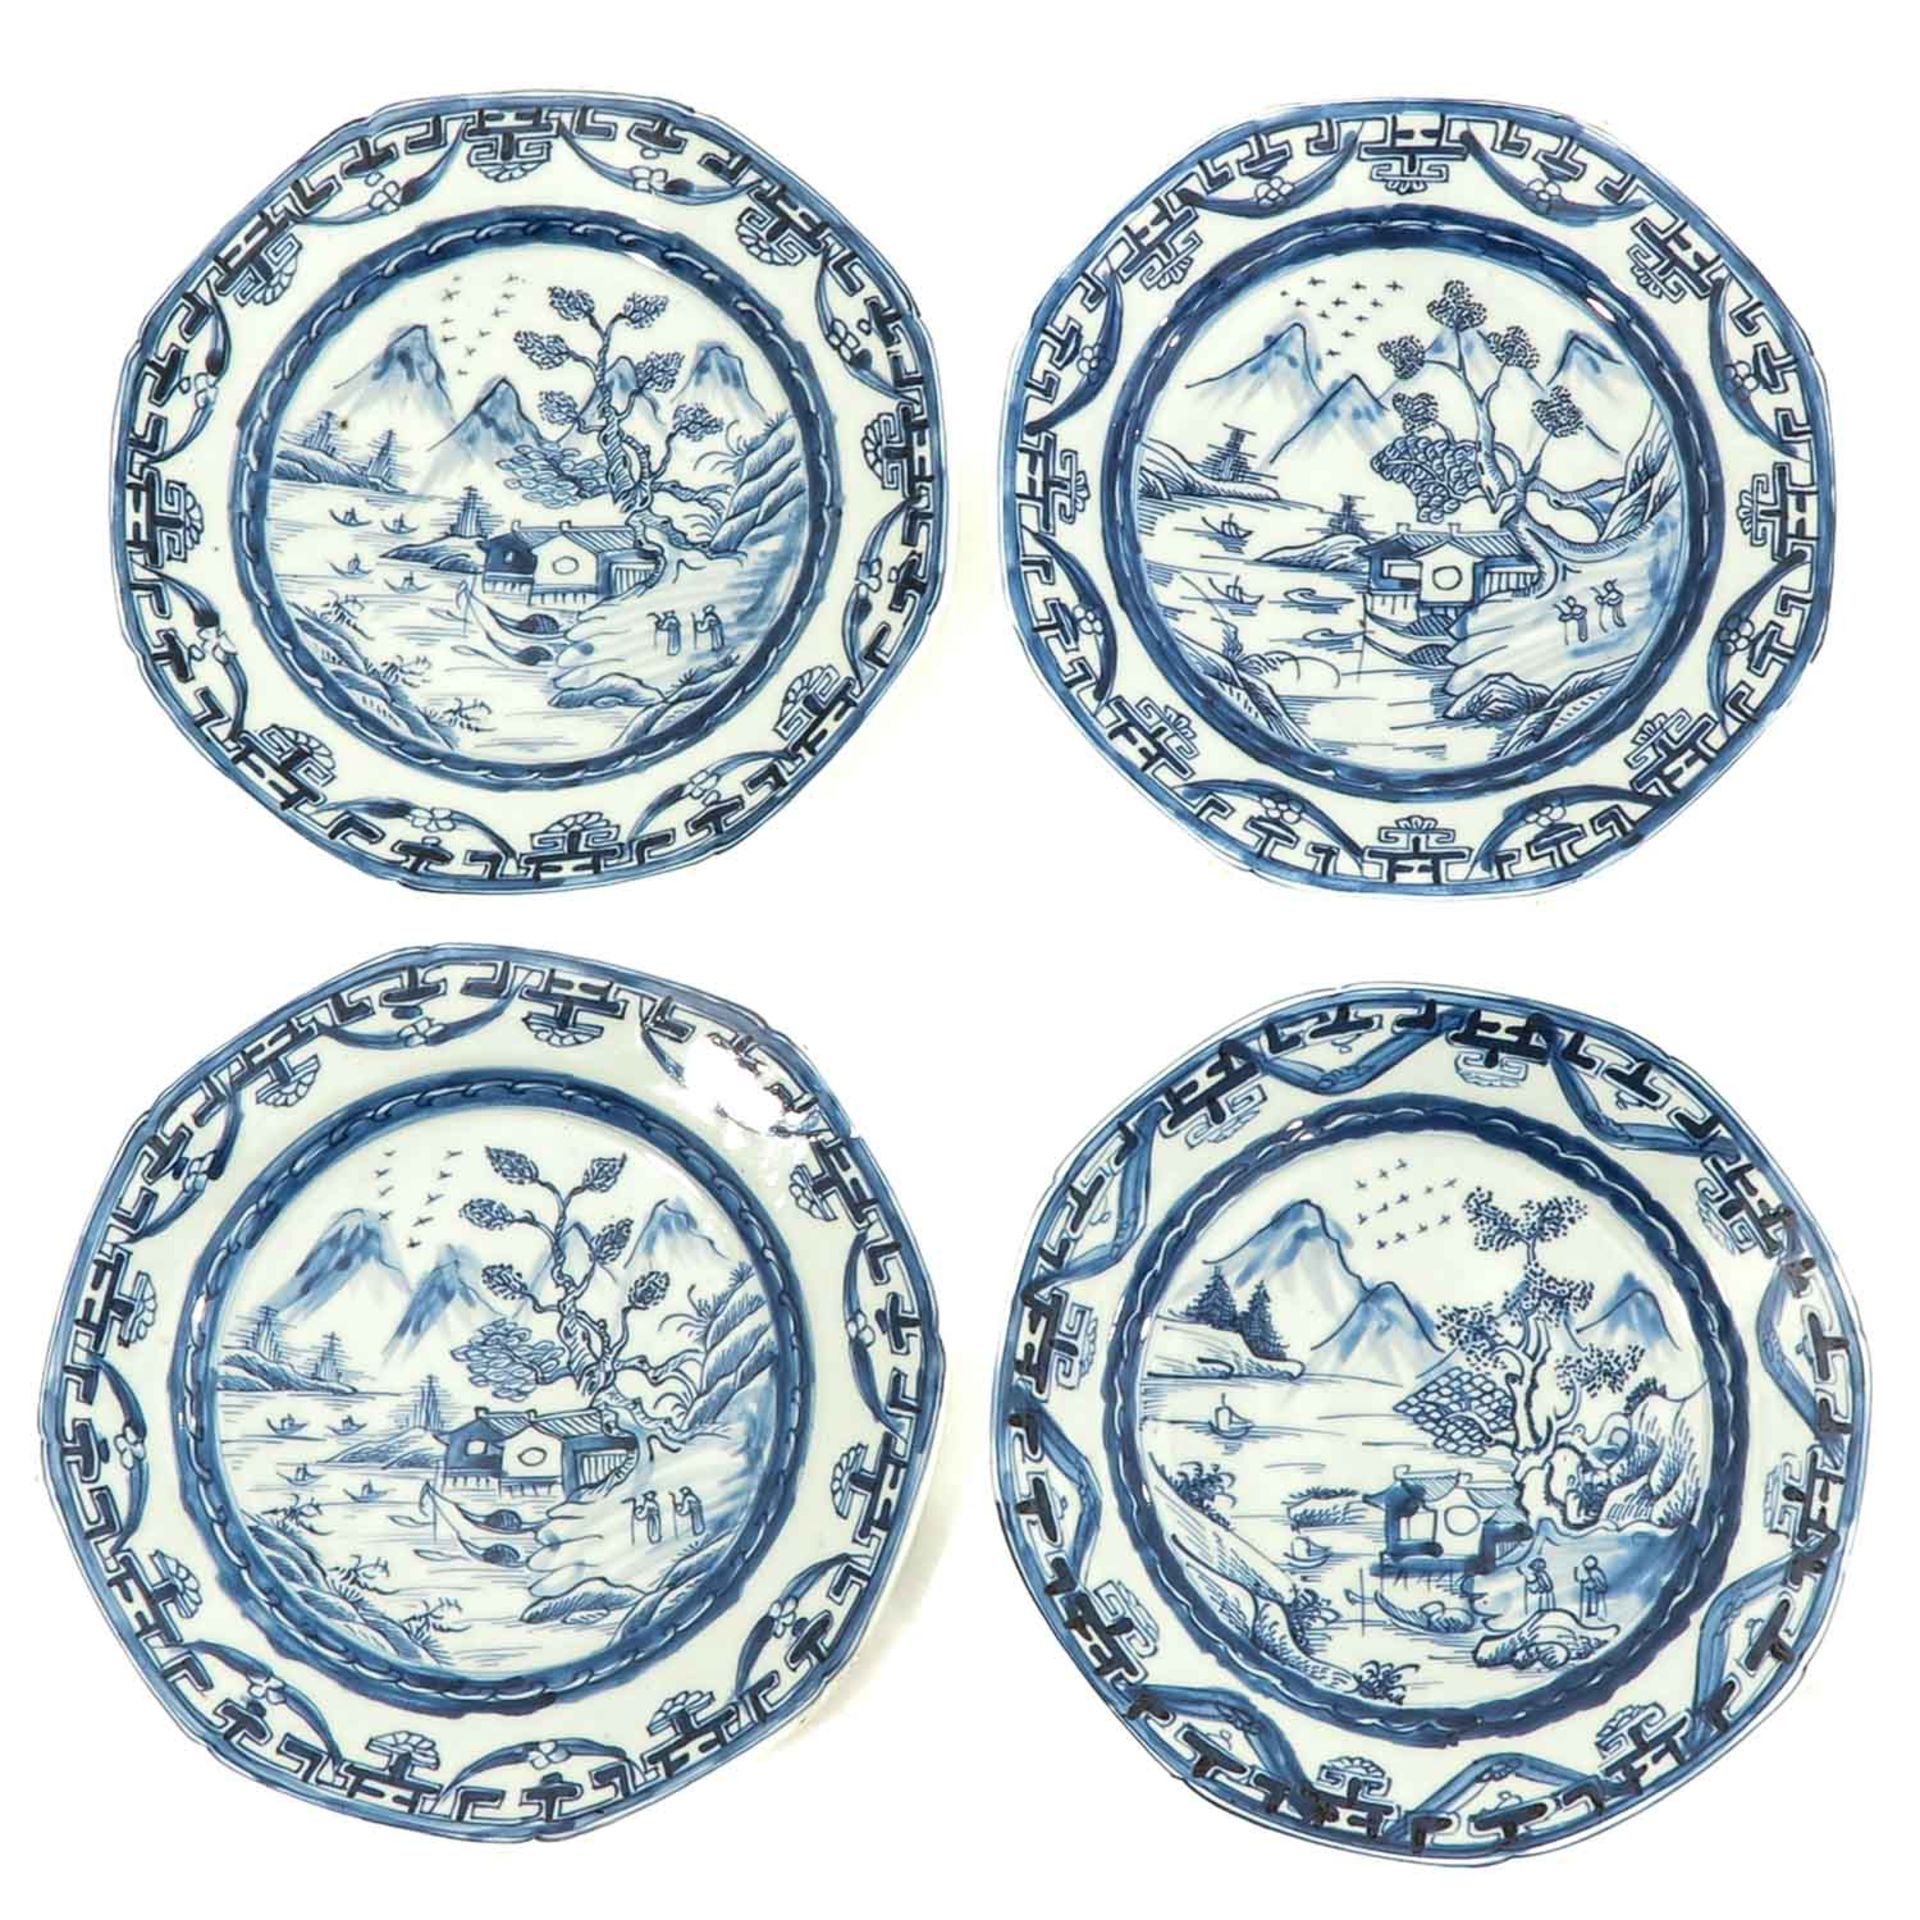 A Series of 12 Blue and White Plates - Bild 3 aus 10